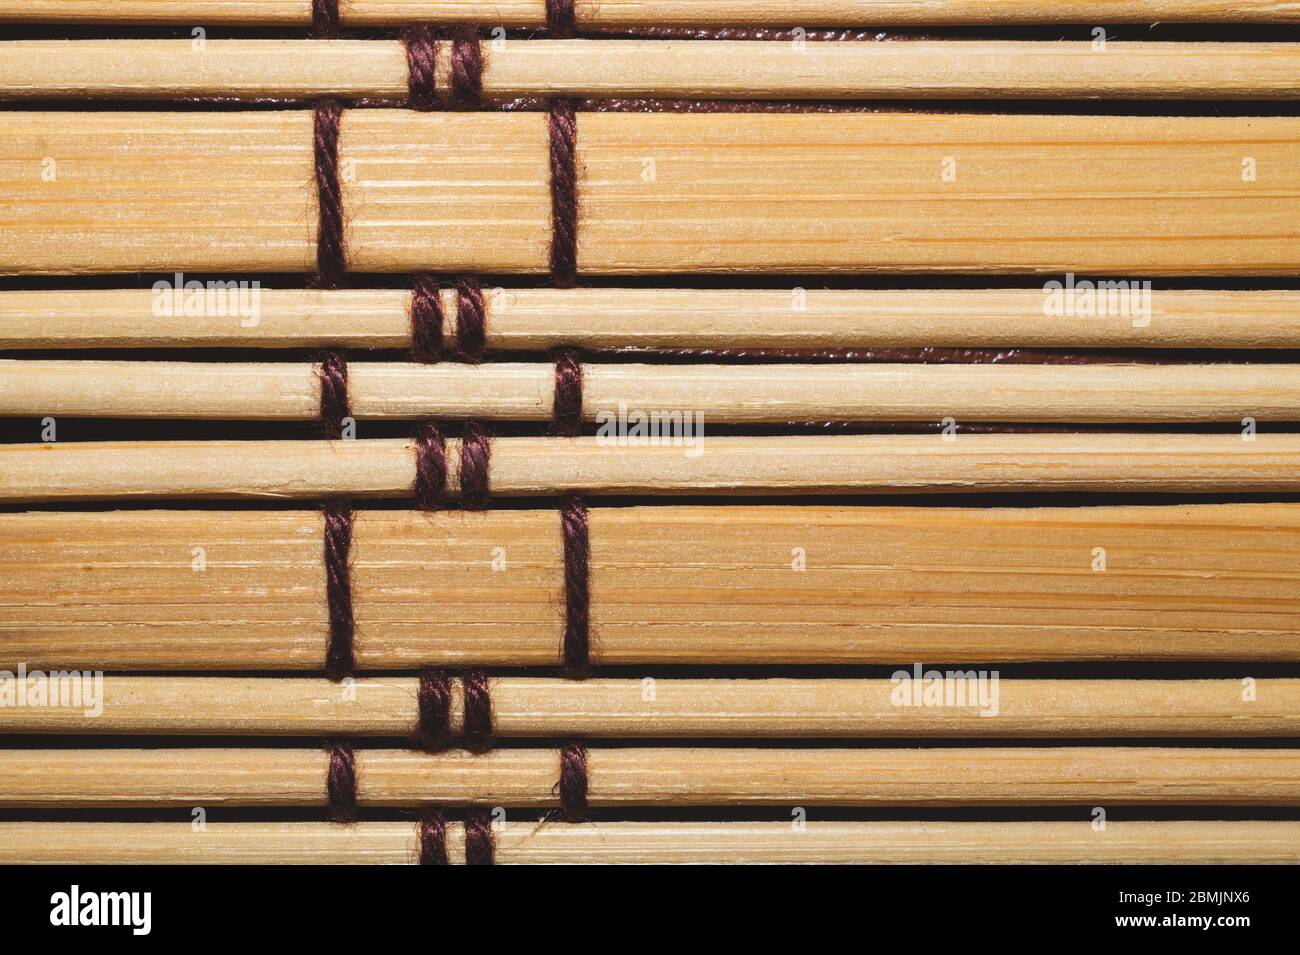 Bamboo mat background close up. wooden backdrop. wooden sticks bound together Stock Photo